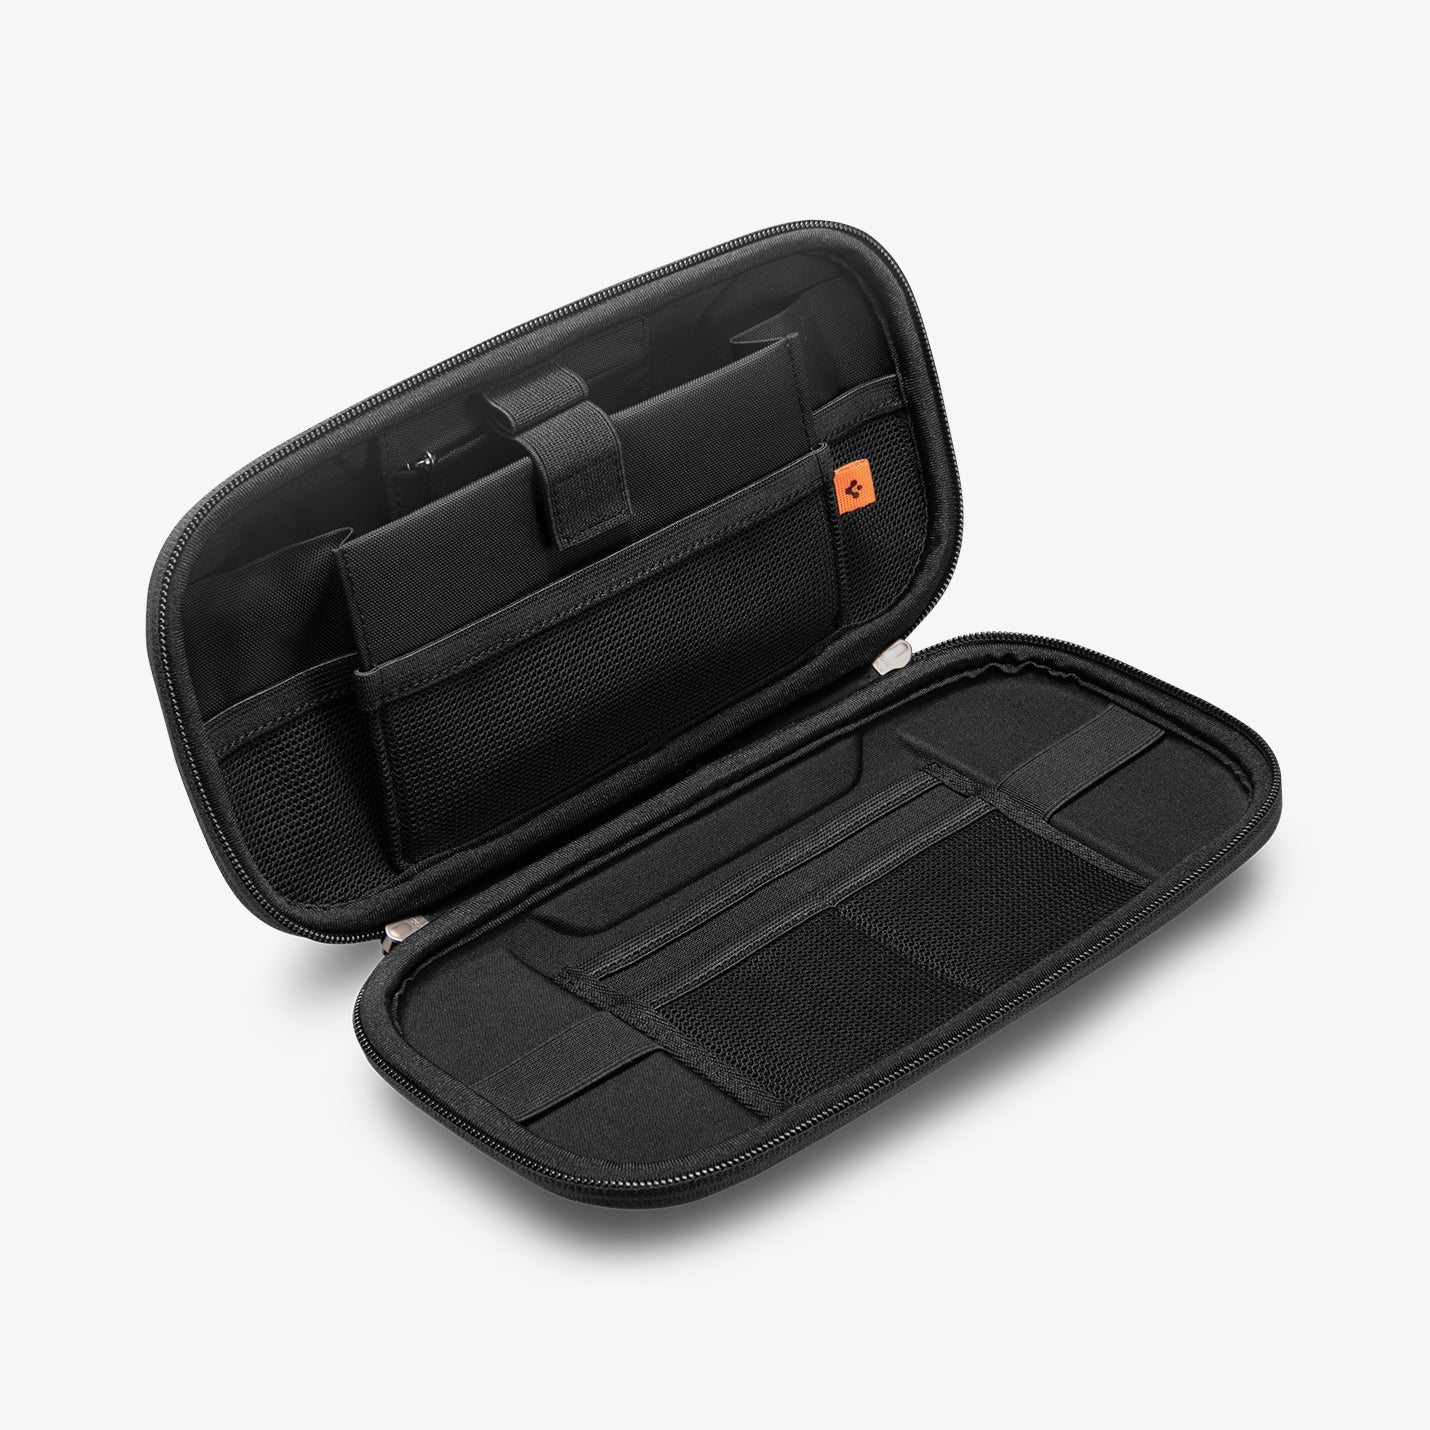 AFA05509 - Rugged Armor® Pro Slim Cable Organizer Bag in black showing the inside of bag and partial side